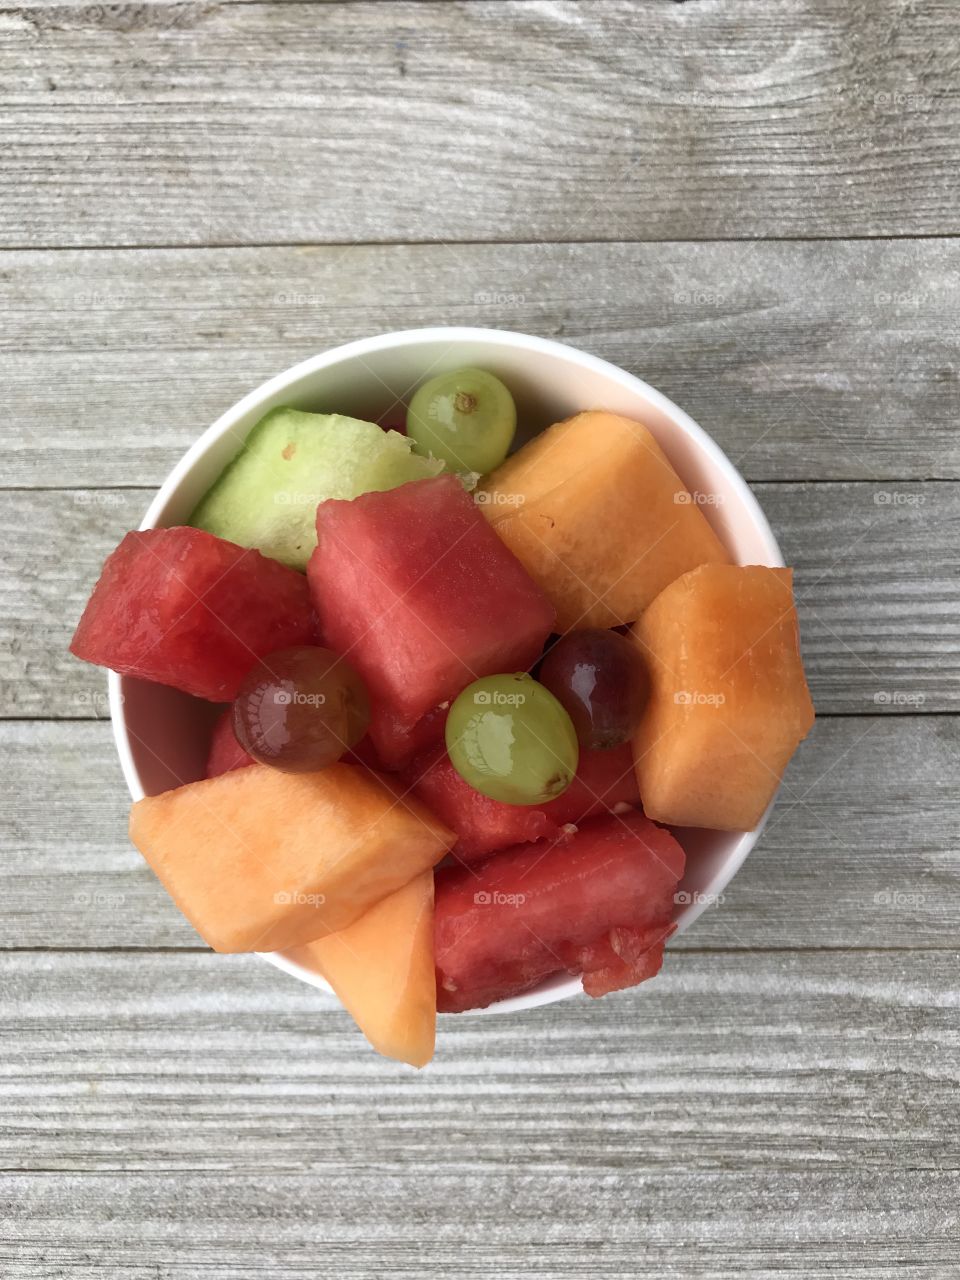 A small white bowl with a variety of summertime fruit for lunch!